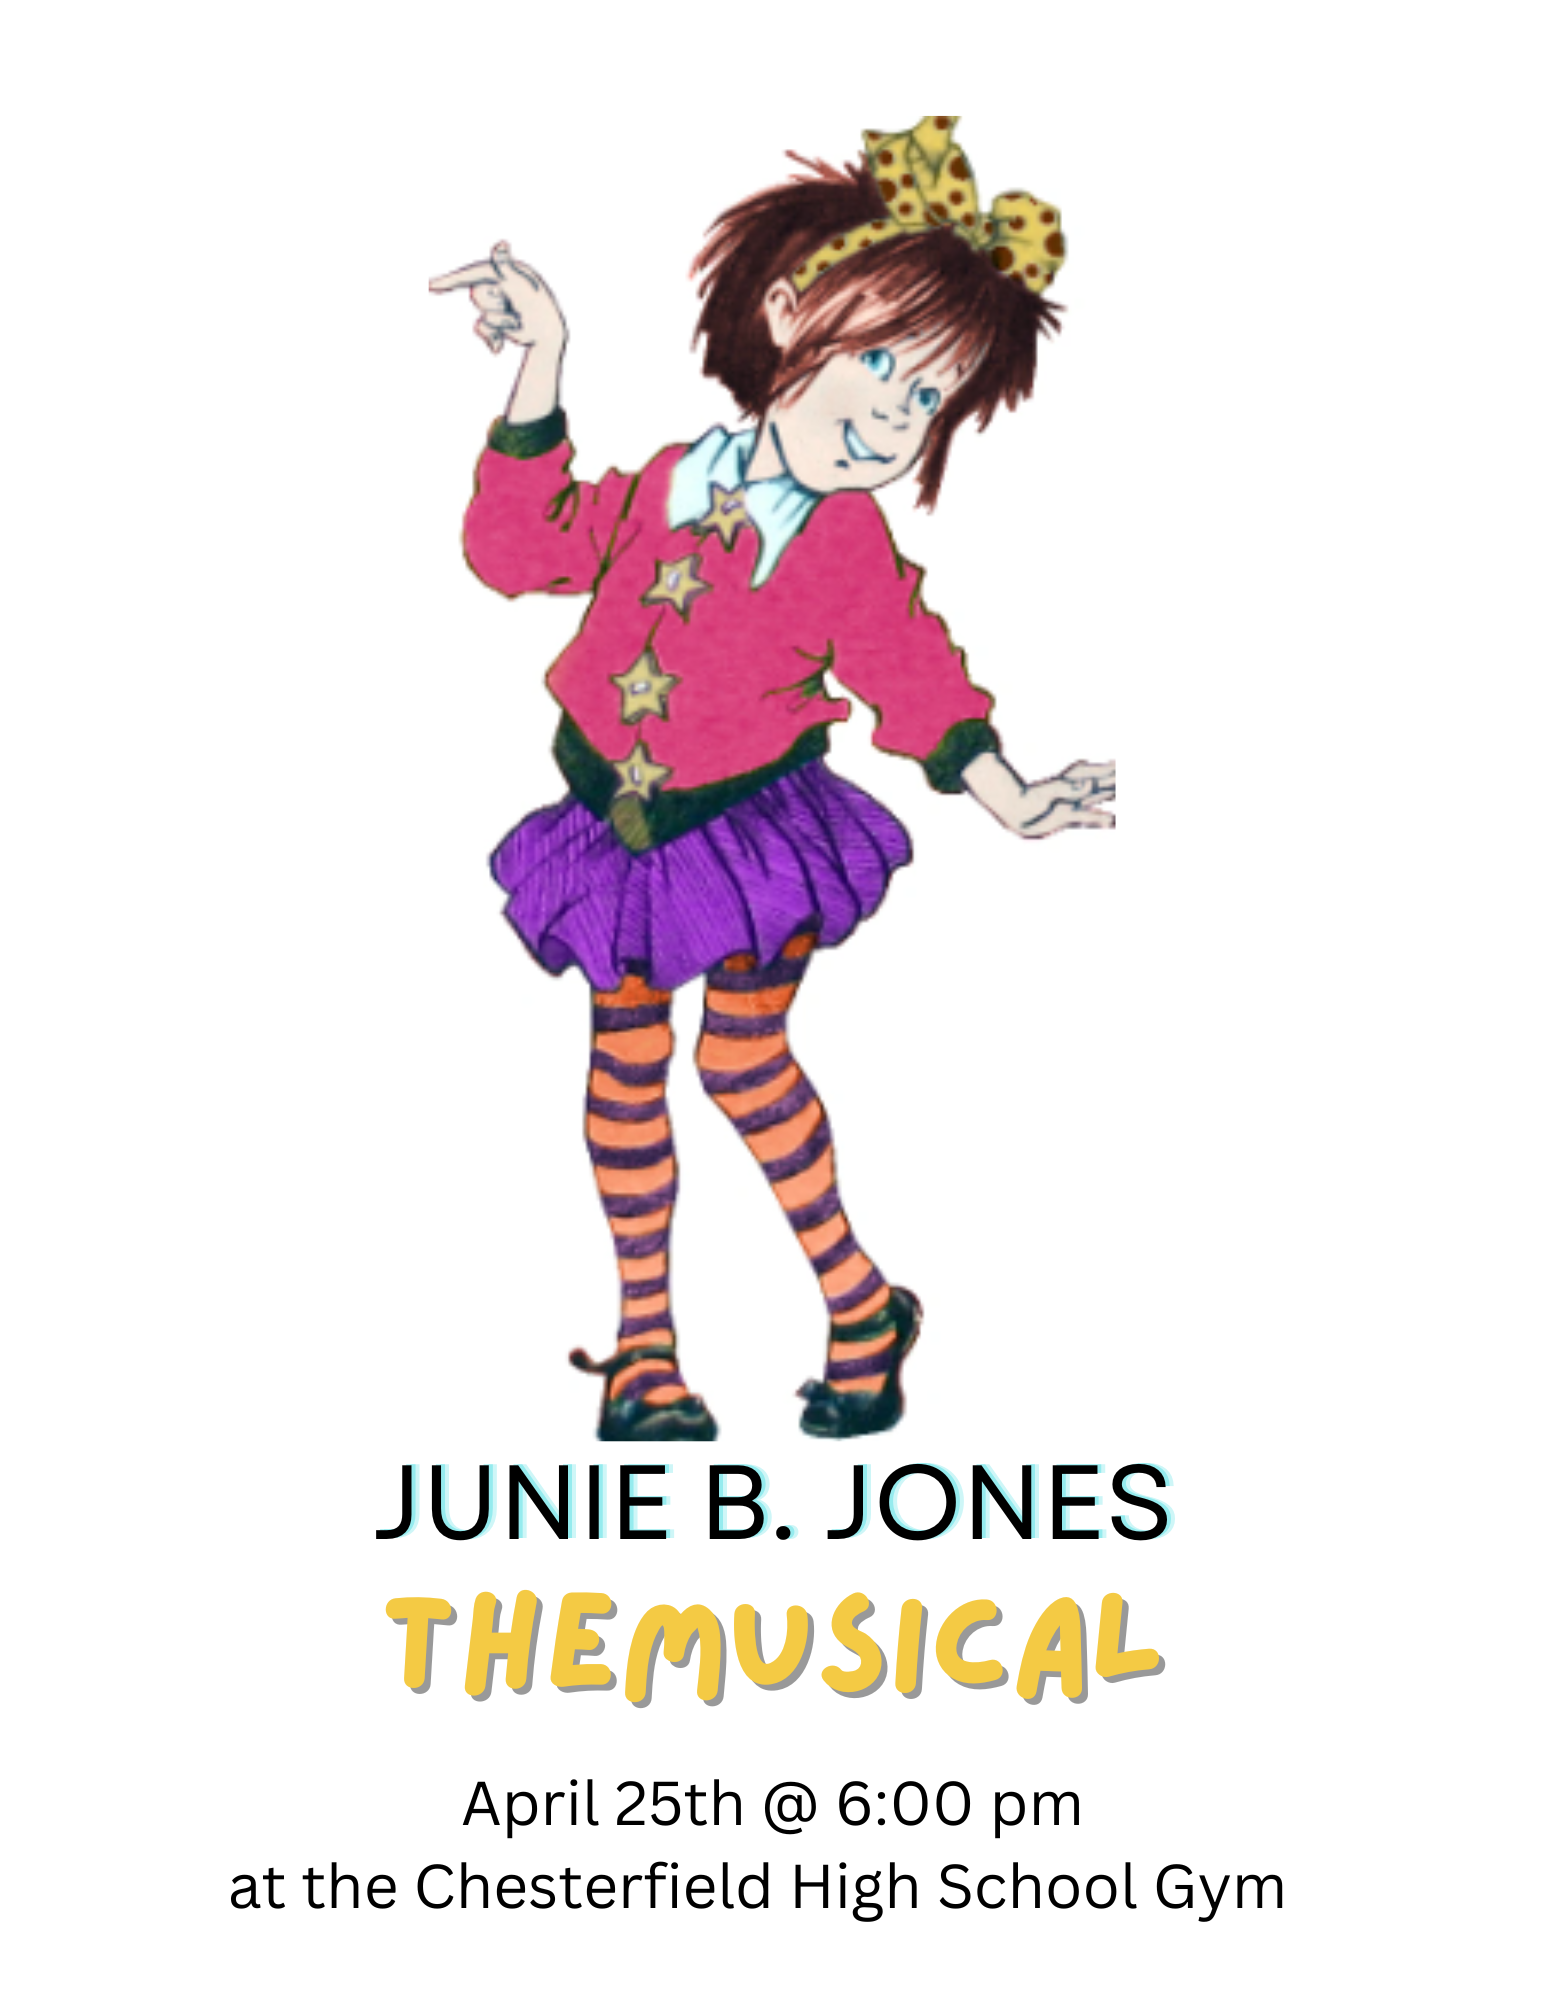 Junie B Jones, the musical, April 25th @ 6pm at the Chesterfield High School Gym